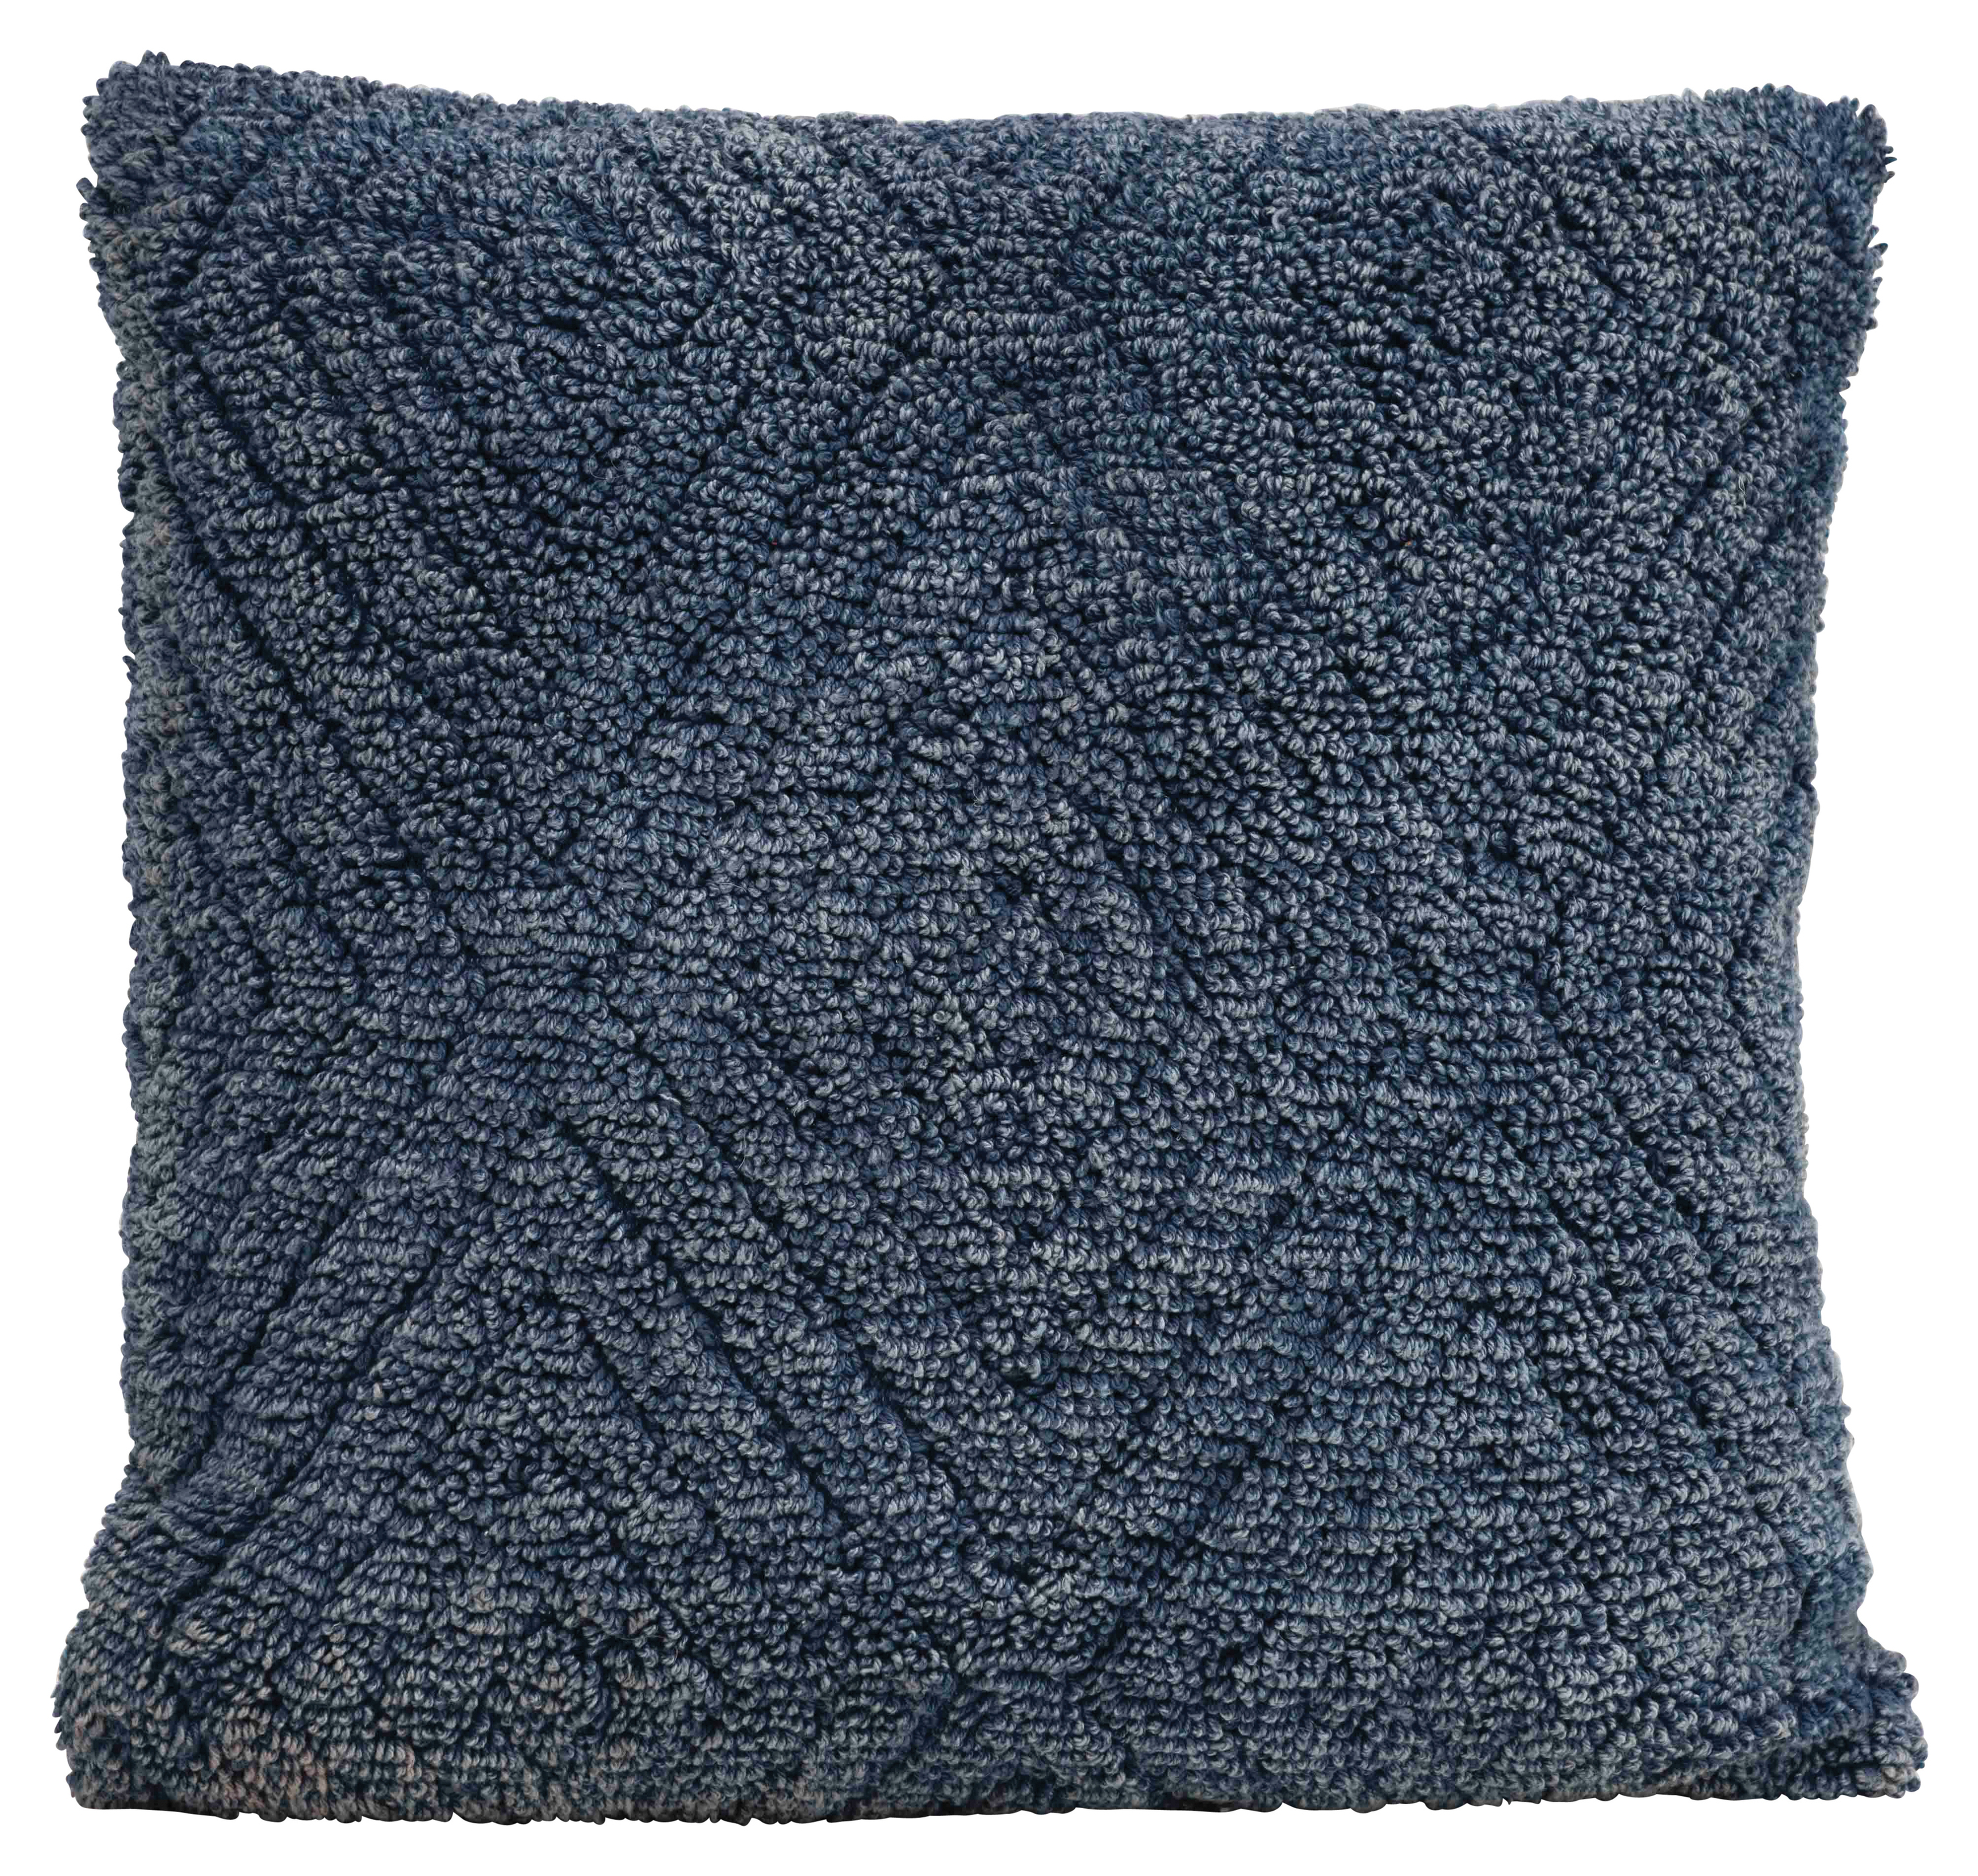 Square Cotton Blend Knit Pillow with Diamond Pattern - Nomad Home